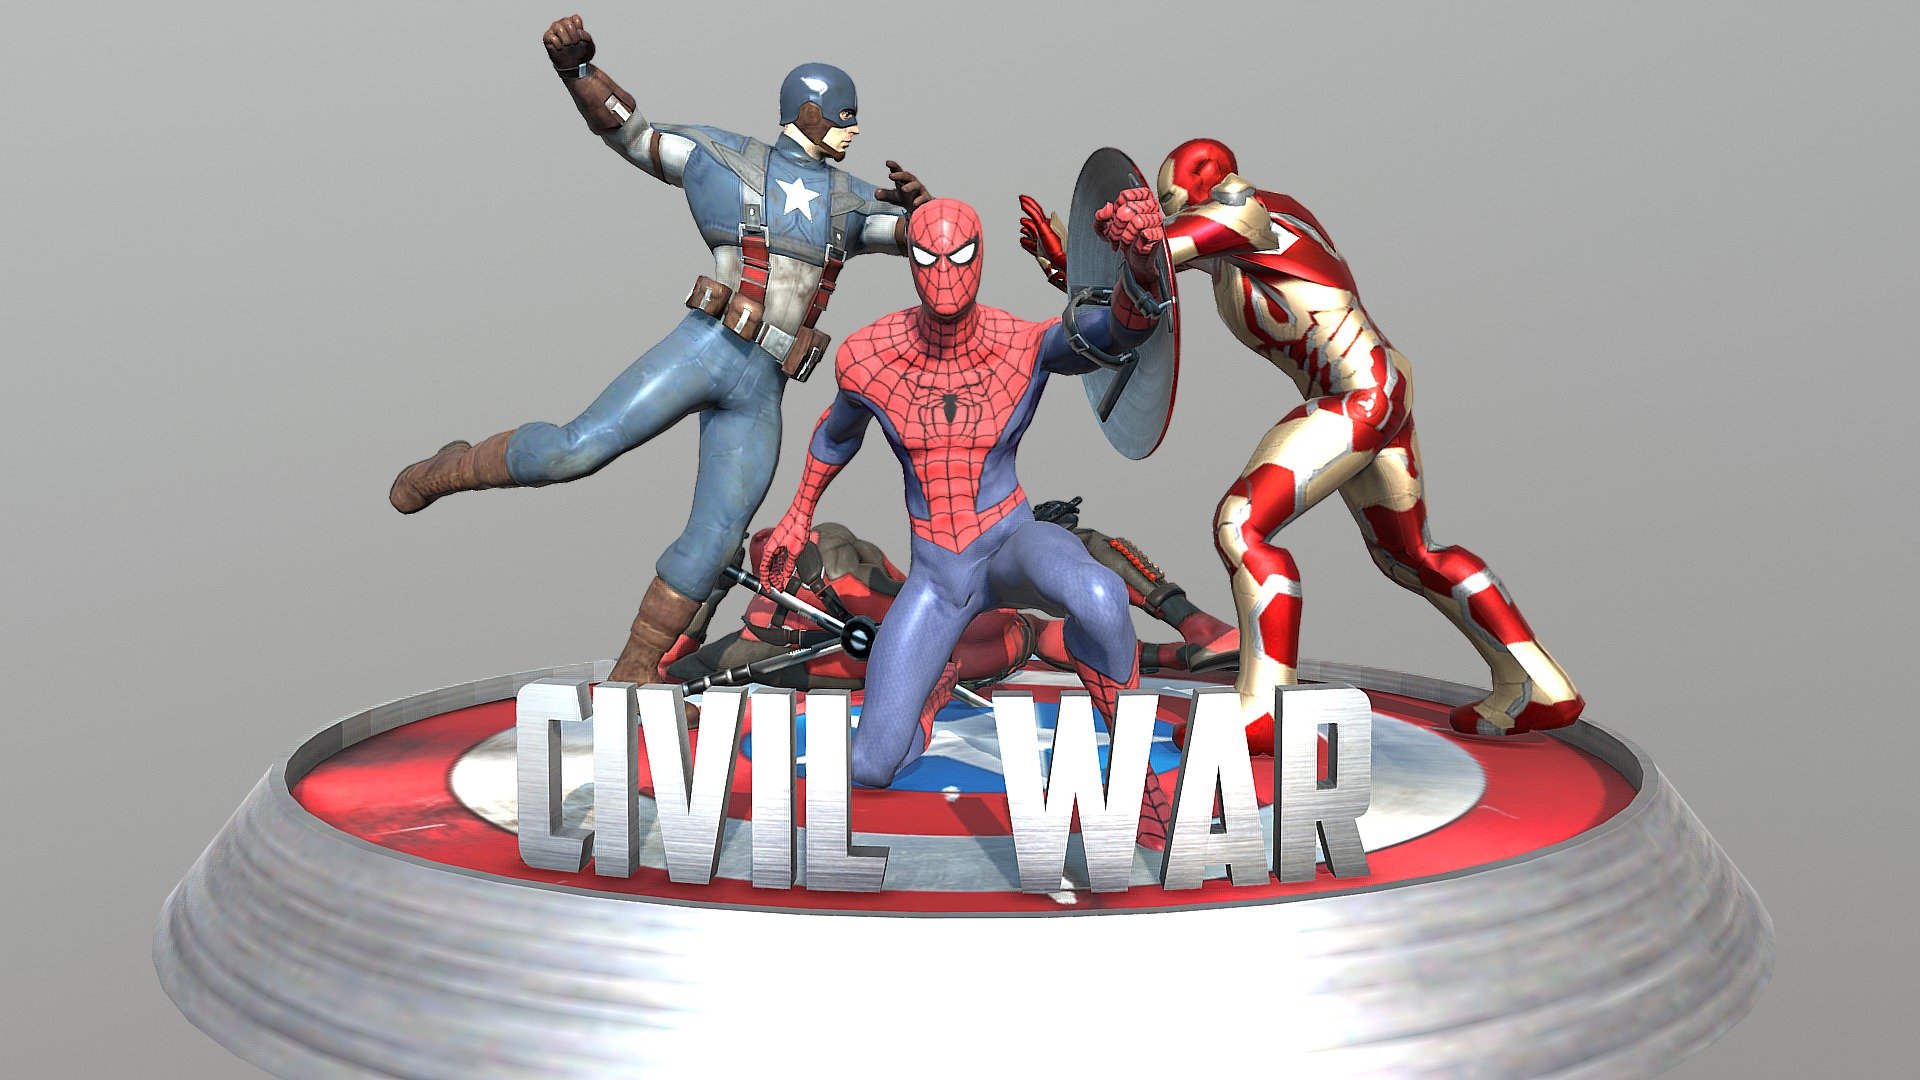 Captain America: Civil War download the new version for iphone